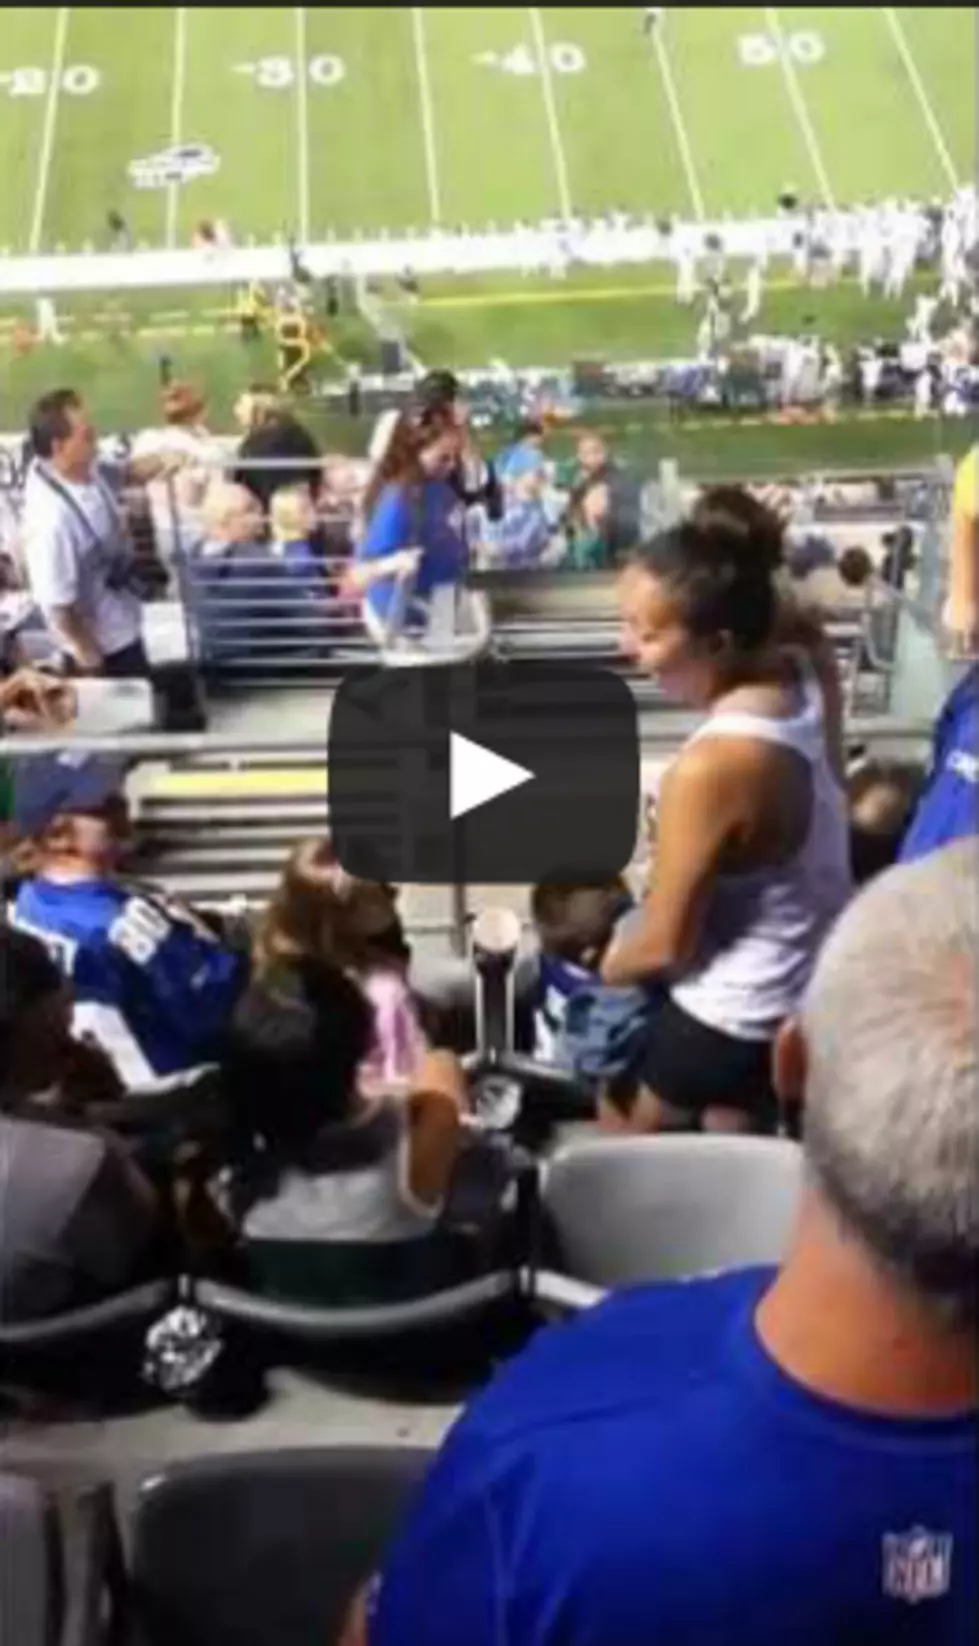 Fight Breaks Out in Stands at NFL Jets/Giants Game Over Weekend [VIDEO]